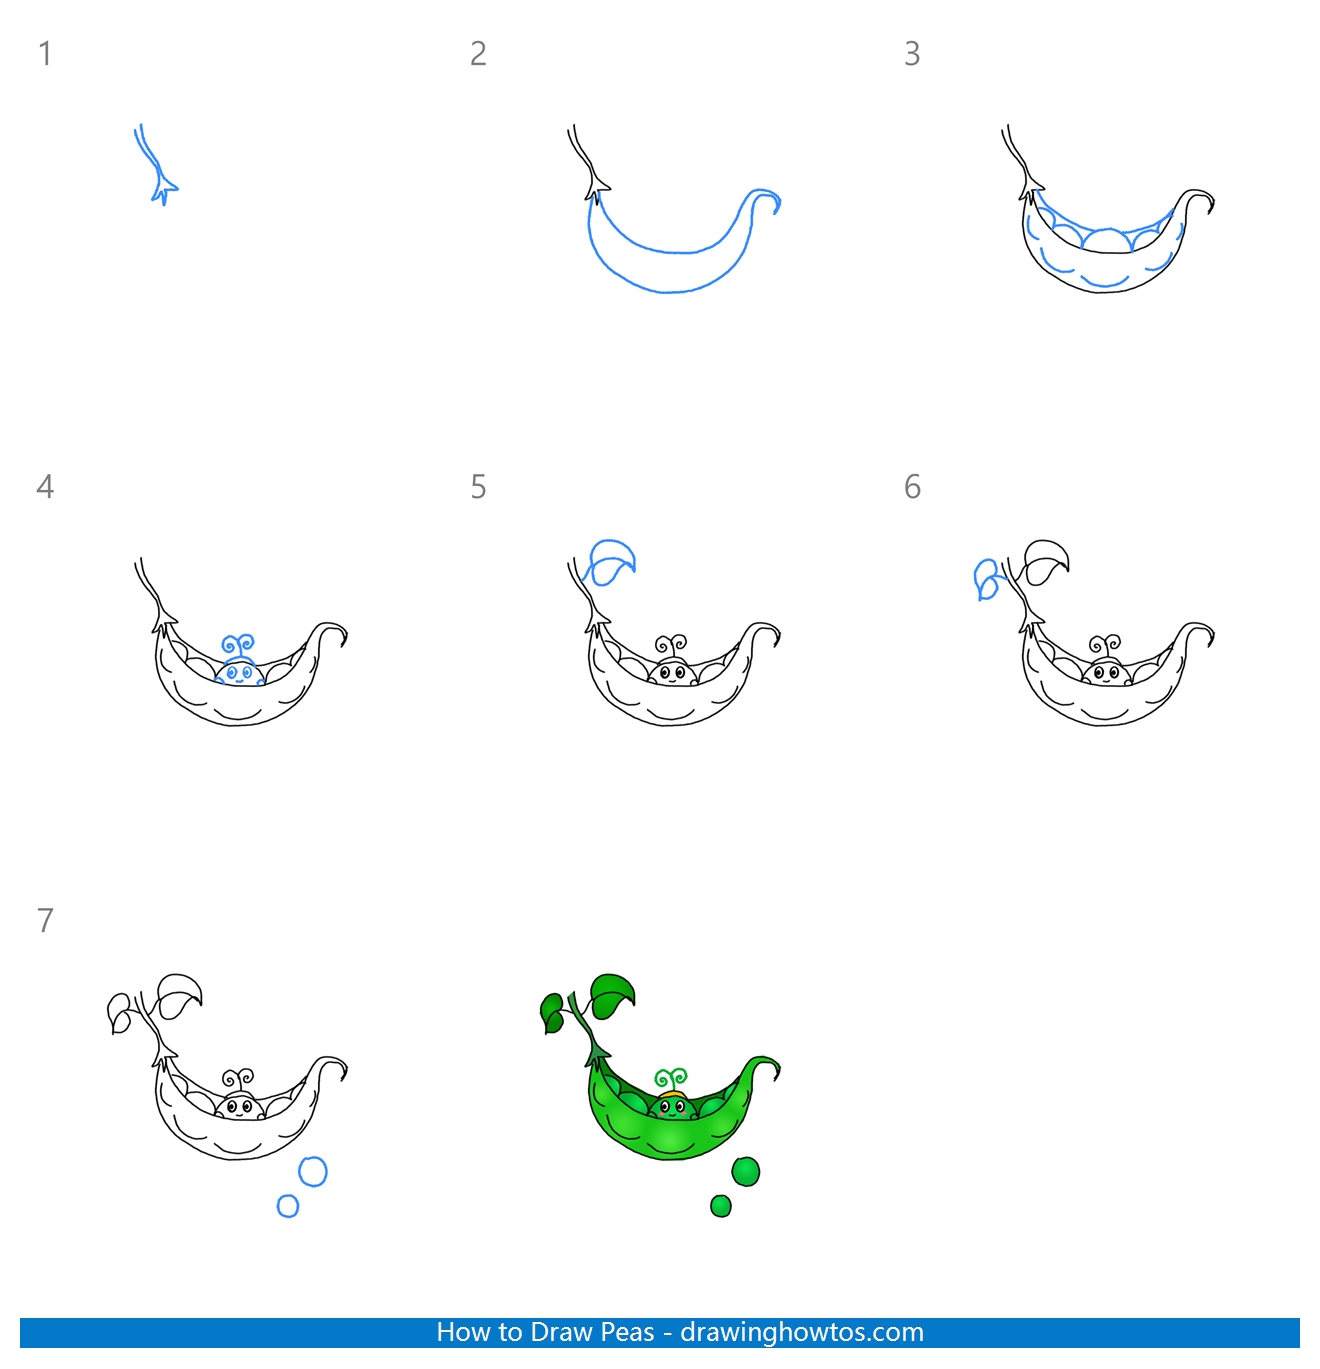 How to Draw Peas Step by Step